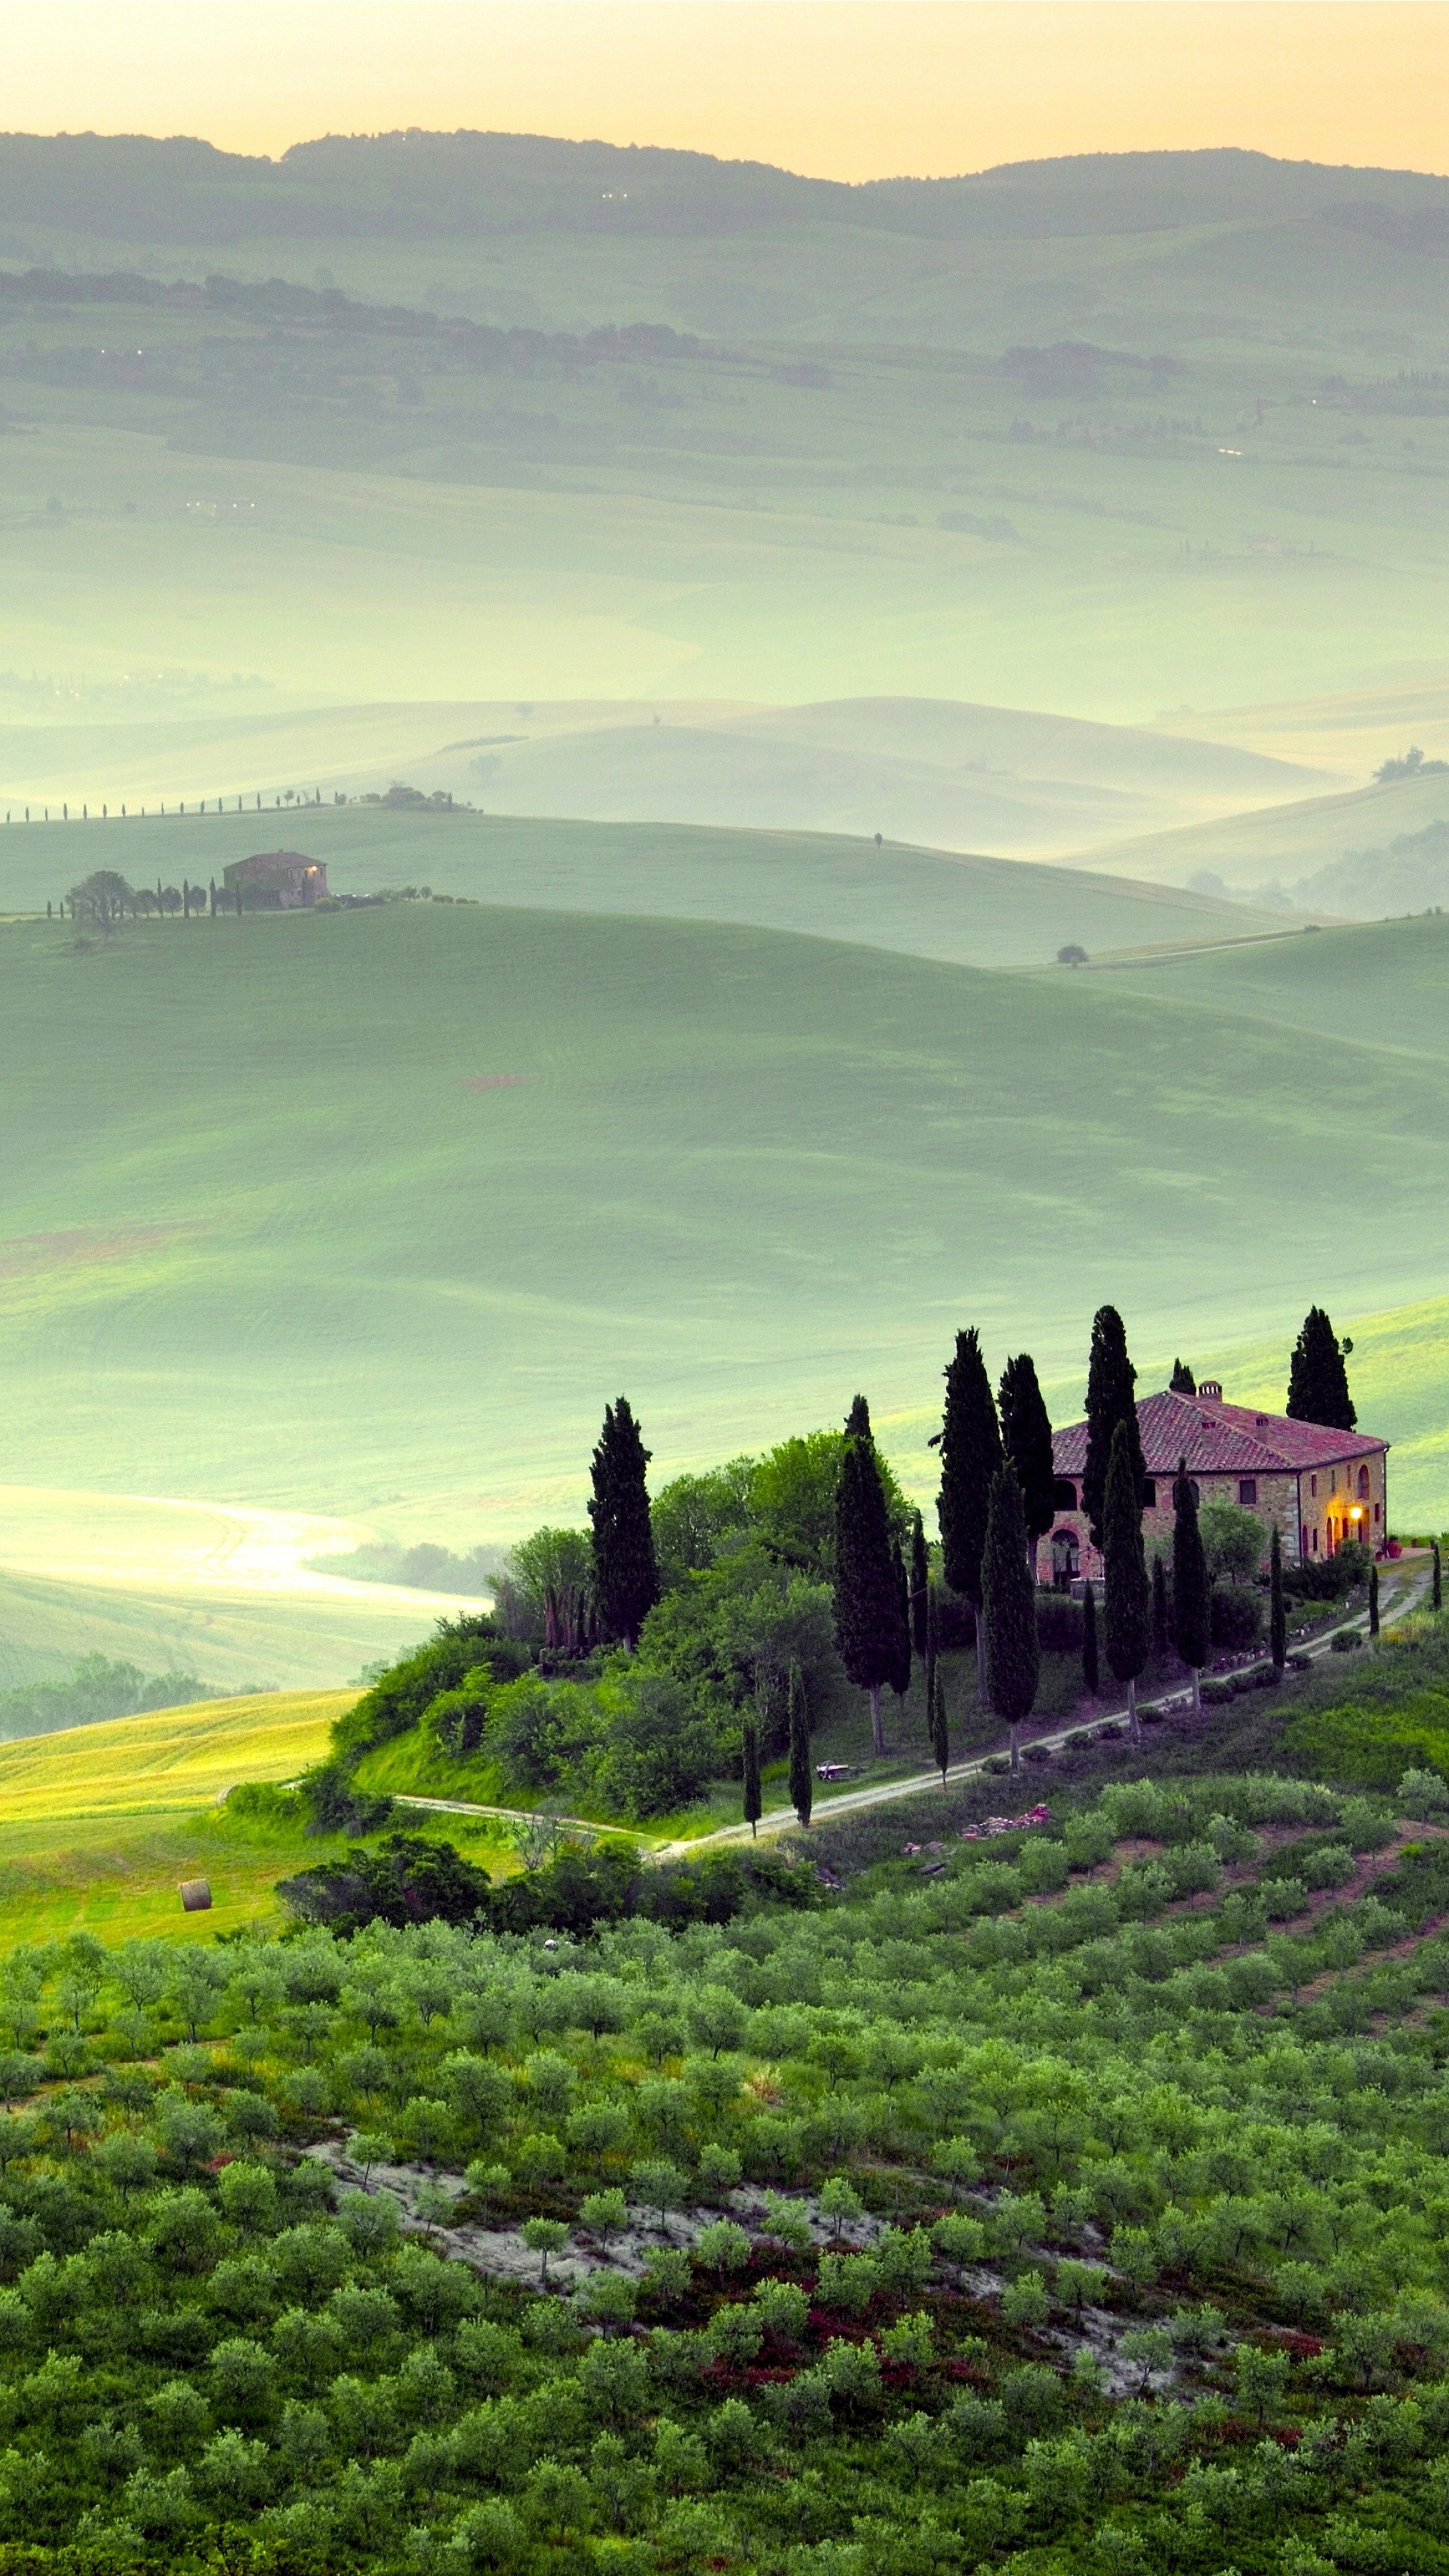 Green Hills: Tuscany region in central Italy, Italian-style country houses surrounded by green fields. 2160x3840 4K Wallpaper.